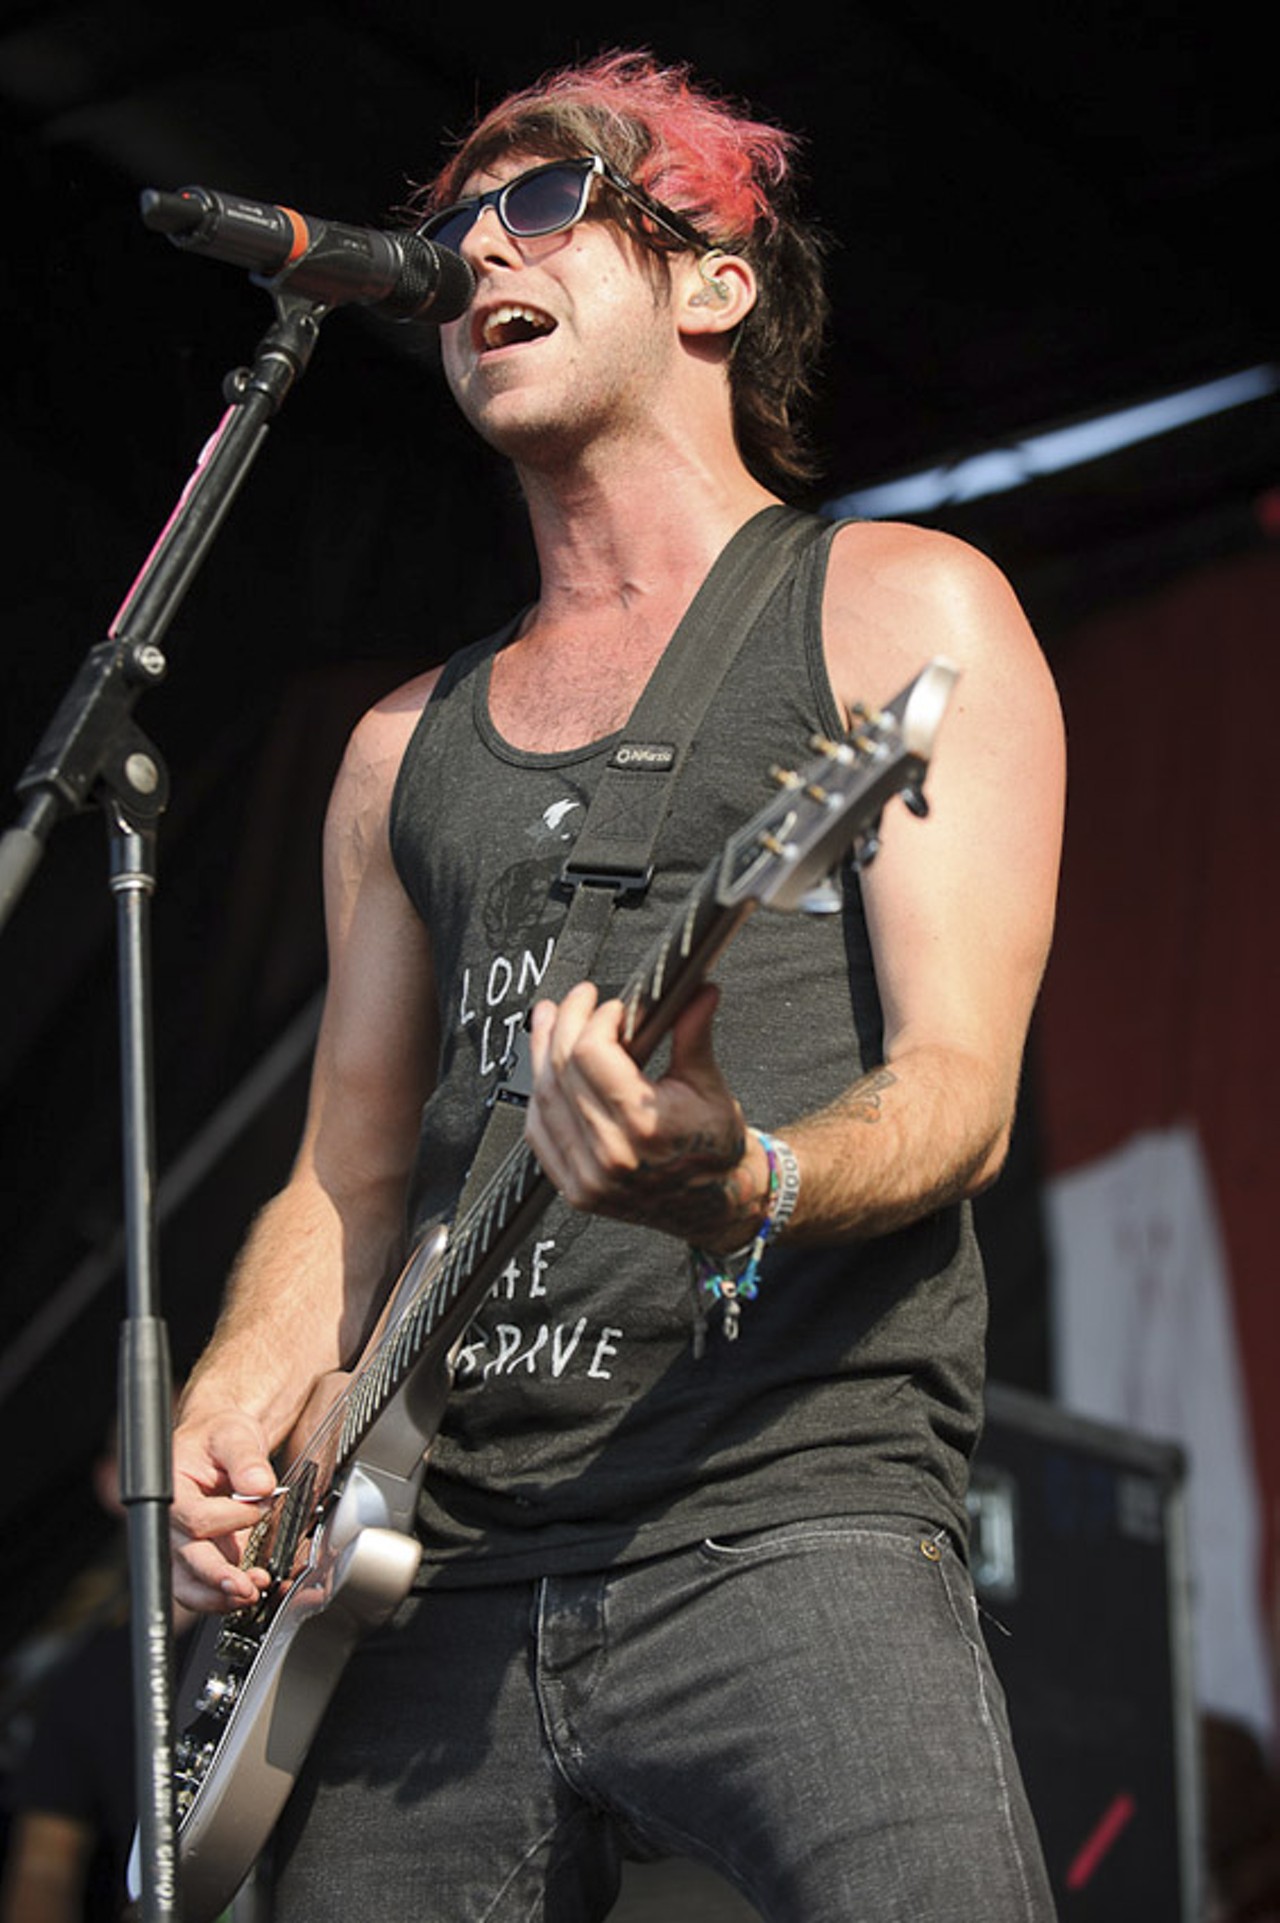 All Time Low performing at Warped Tour at the Verizon Wireless Amphitheater in St. Louis on July 5, 2012.